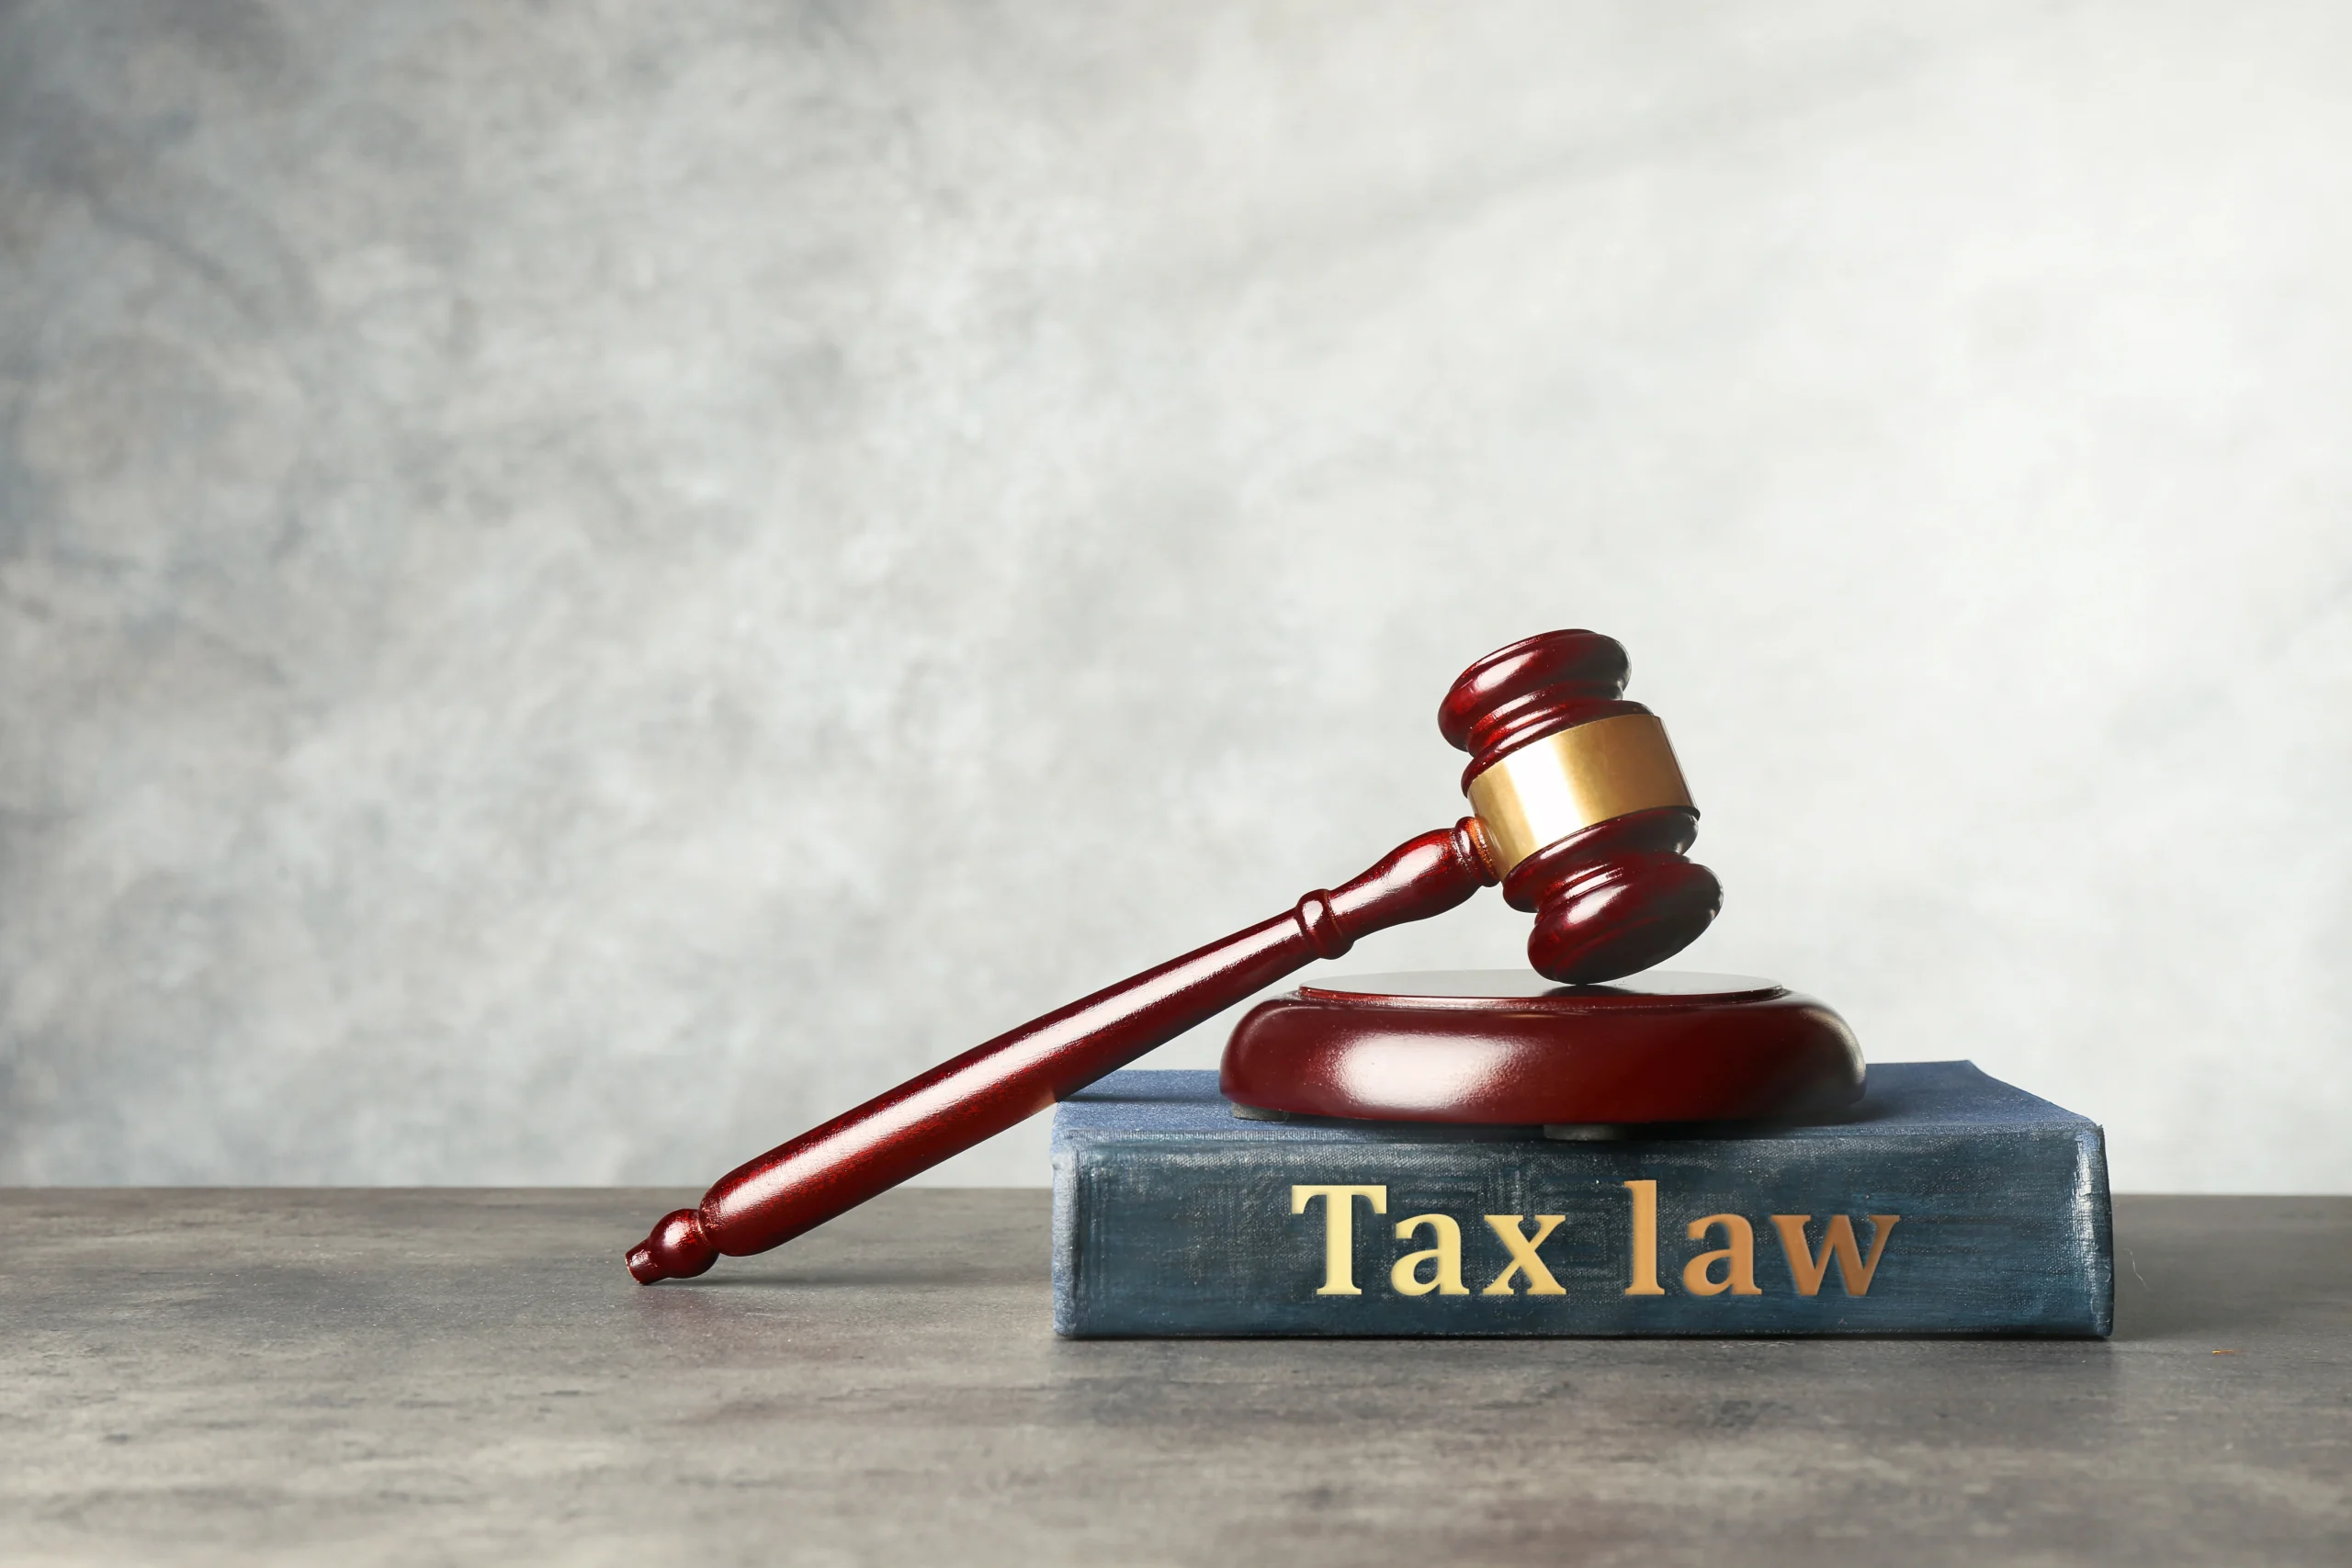 Justice gavel sits on top of a Tax Law book. If you’re being audited by the IRS and looking for tax law expertise, contact our experienced tax attorney in San Antonio or Austin.